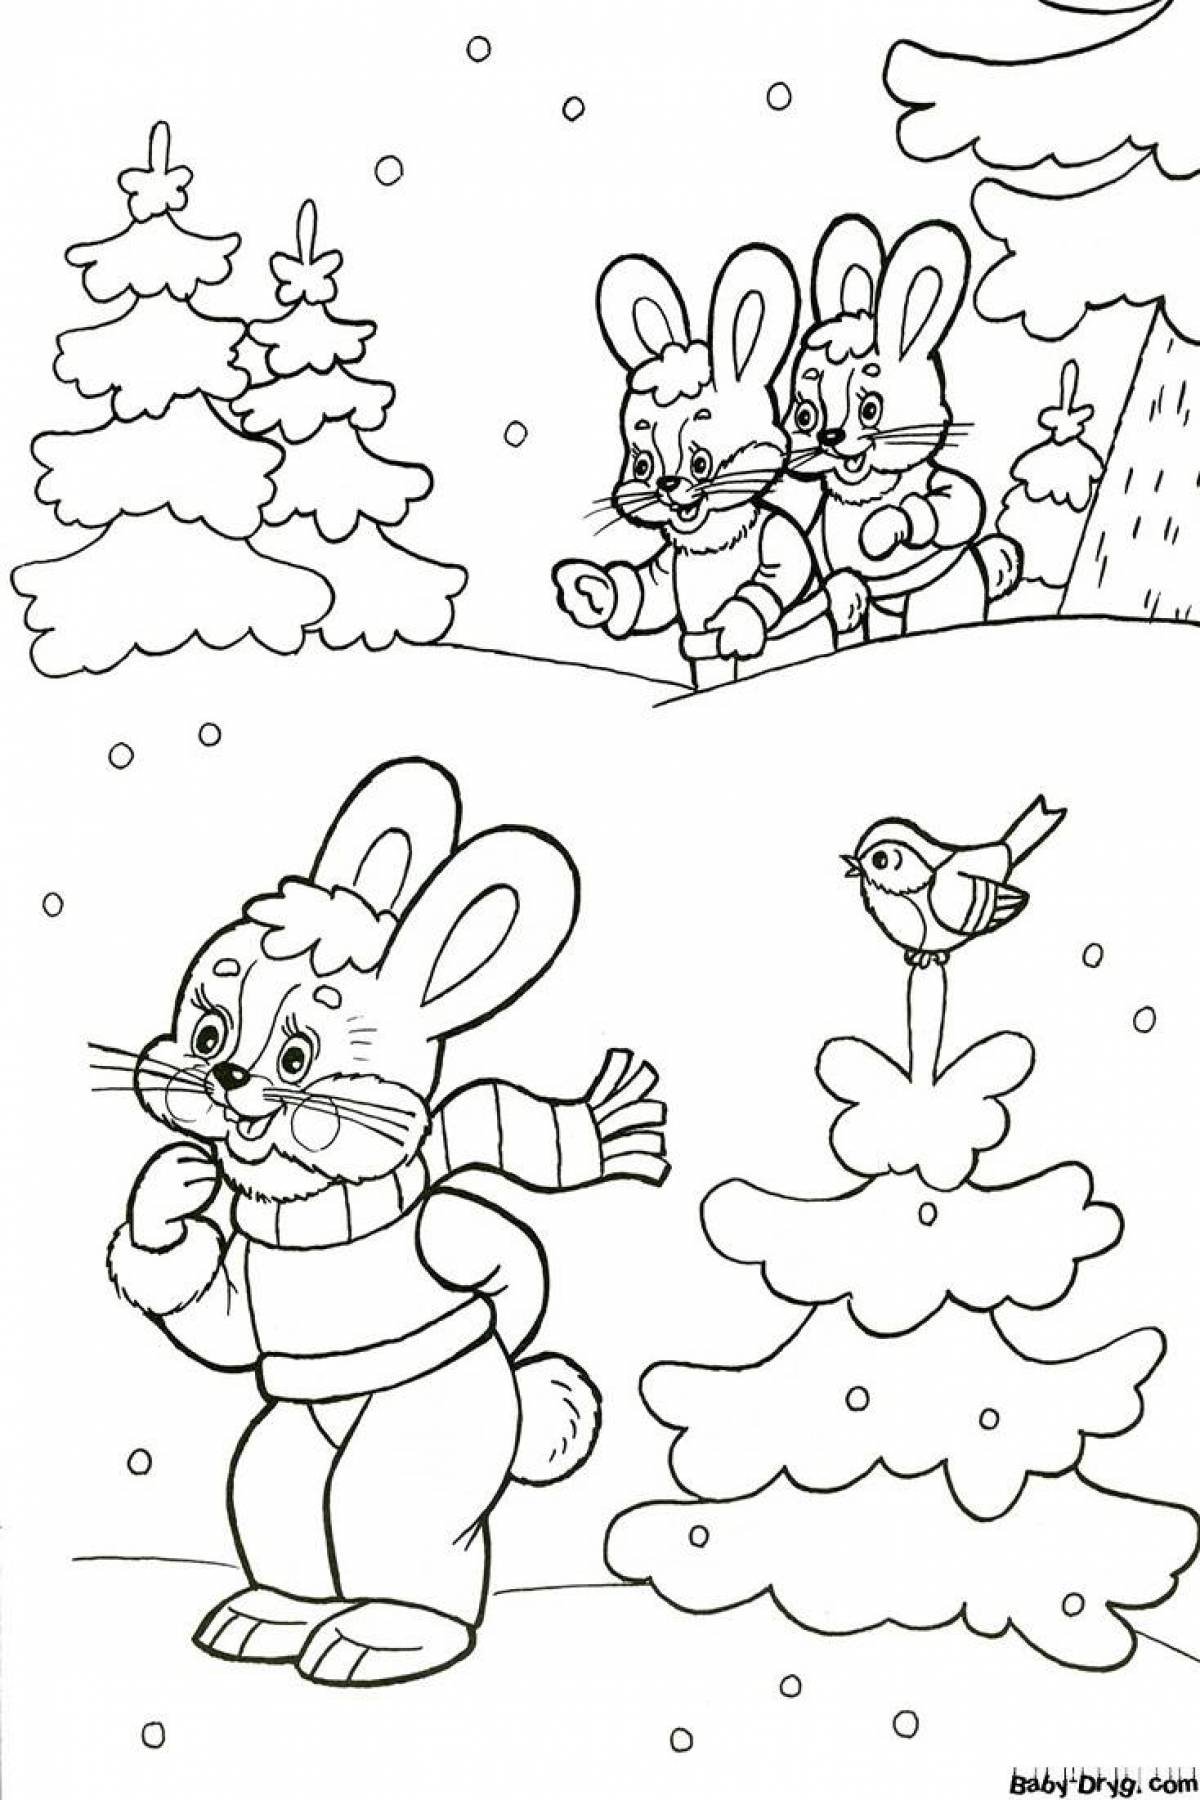 Fabulous winter forest coloring pages for kids